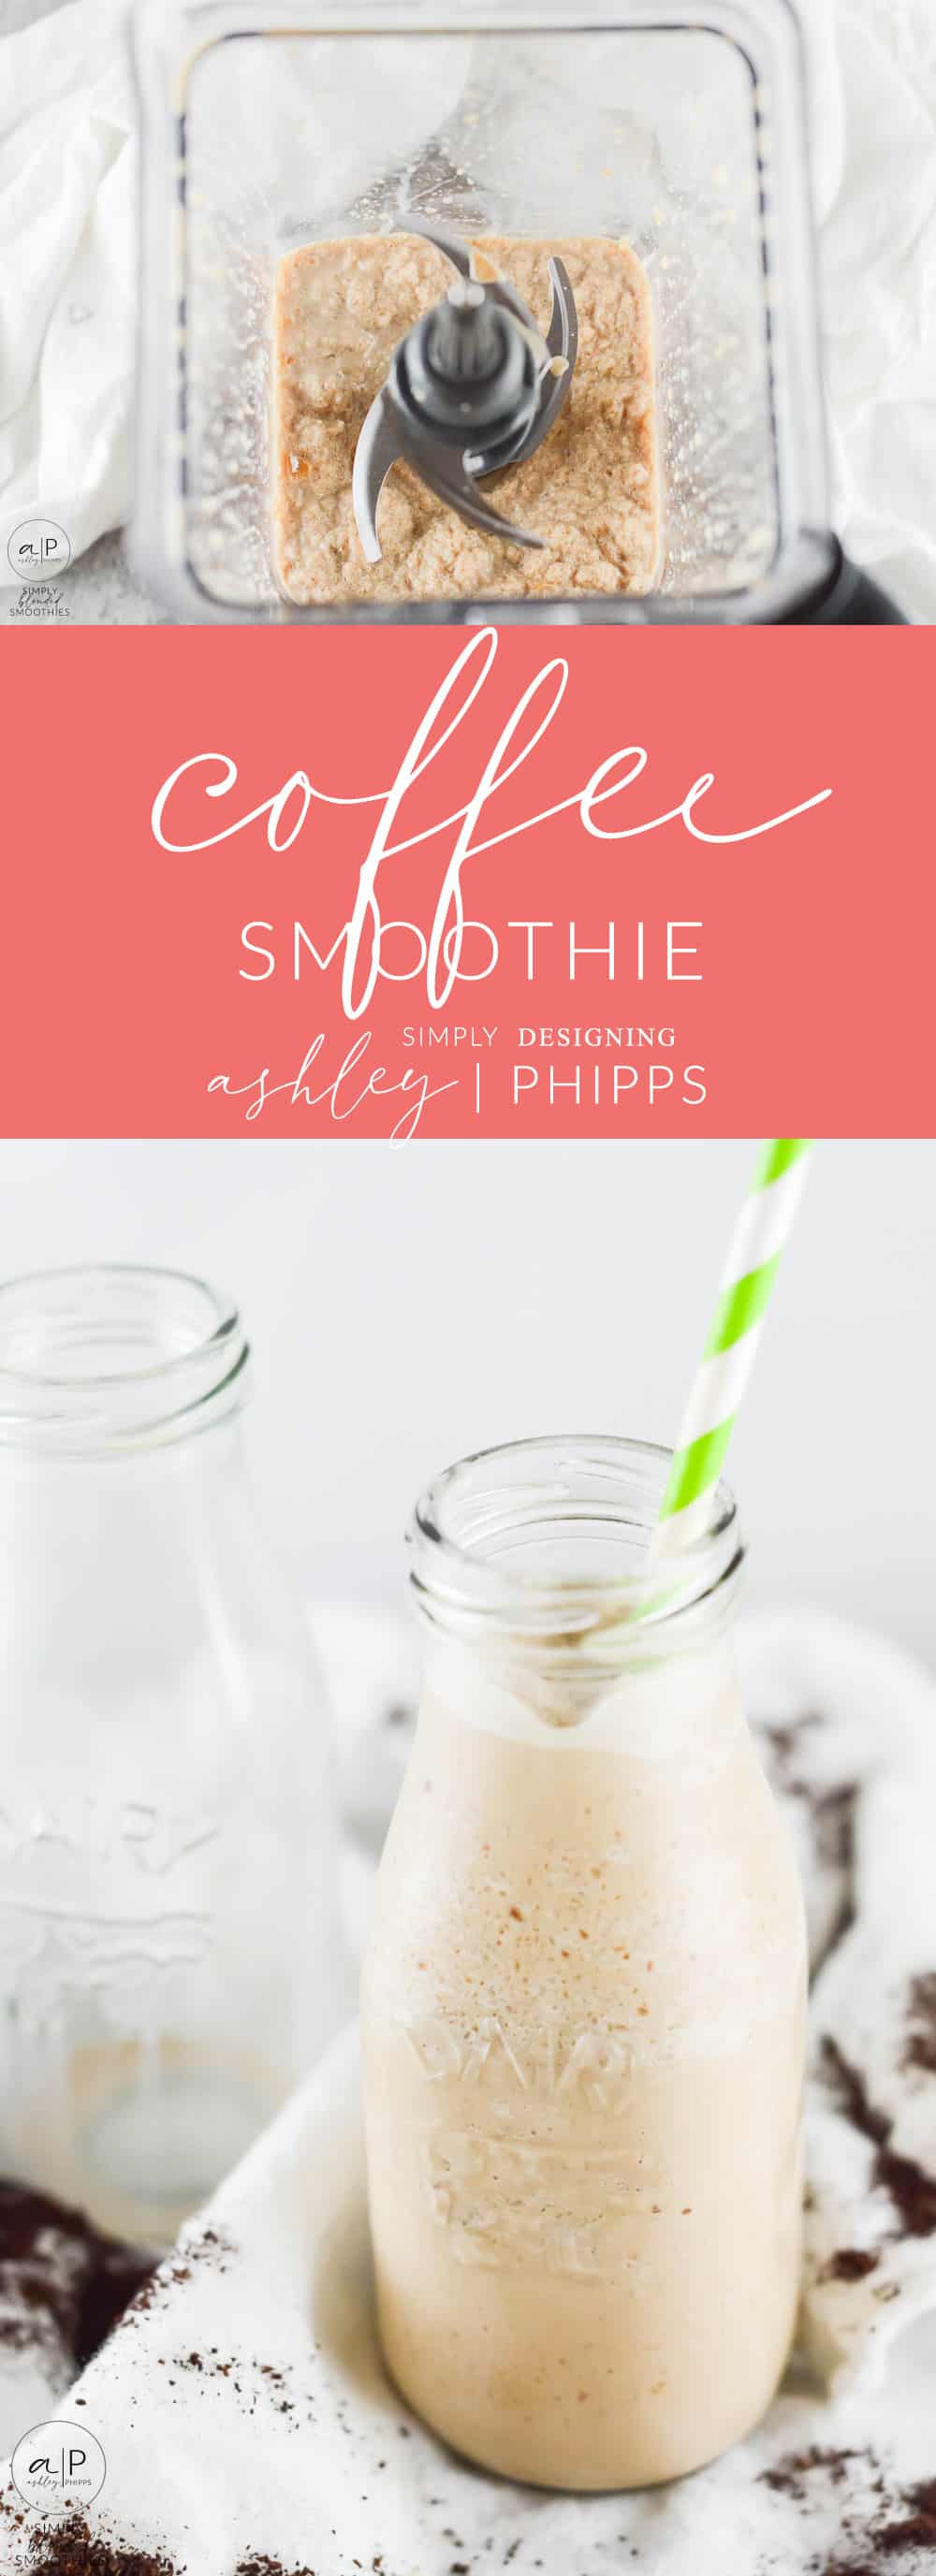 Start Your Day Off Right And Whip Up This Delightful Coffee Smoothie.&Nbsp; Frozen, Black Coffee Pairs With Cream And Caramel To Make The Perfect Treat For A Good Morning. Great For Breakfast, Dessert, Or Even A Snack!